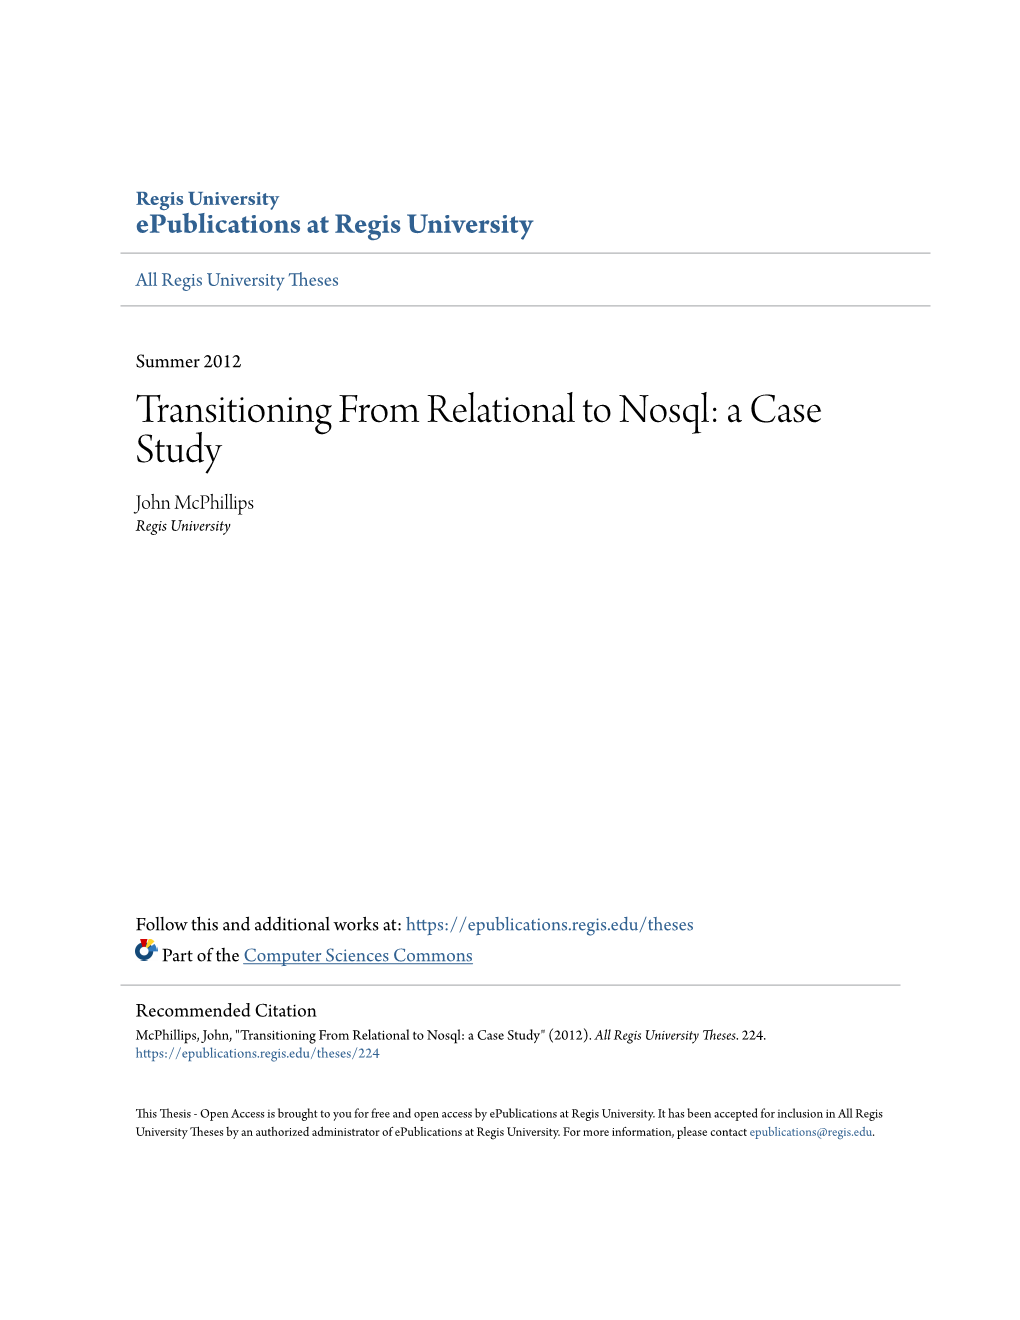 Transitioning from Relational to Nosql: a Case Study John Mcphillips Regis University